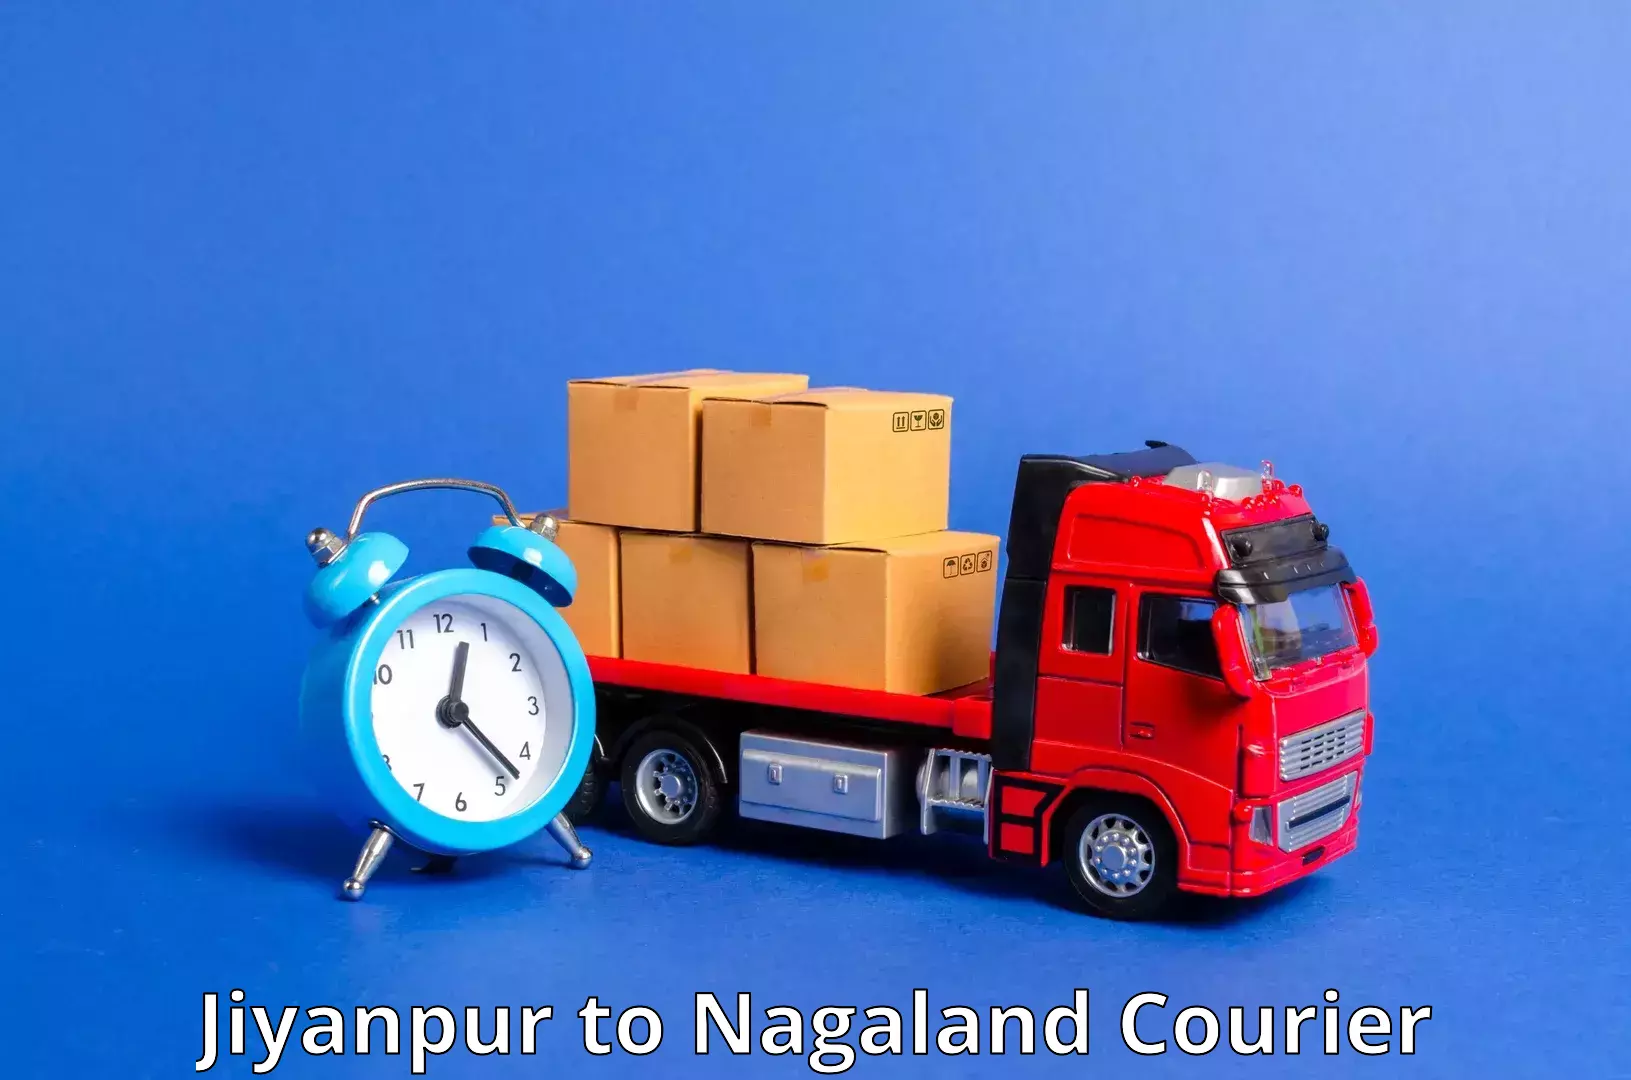 Local delivery service Jiyanpur to Dimapur